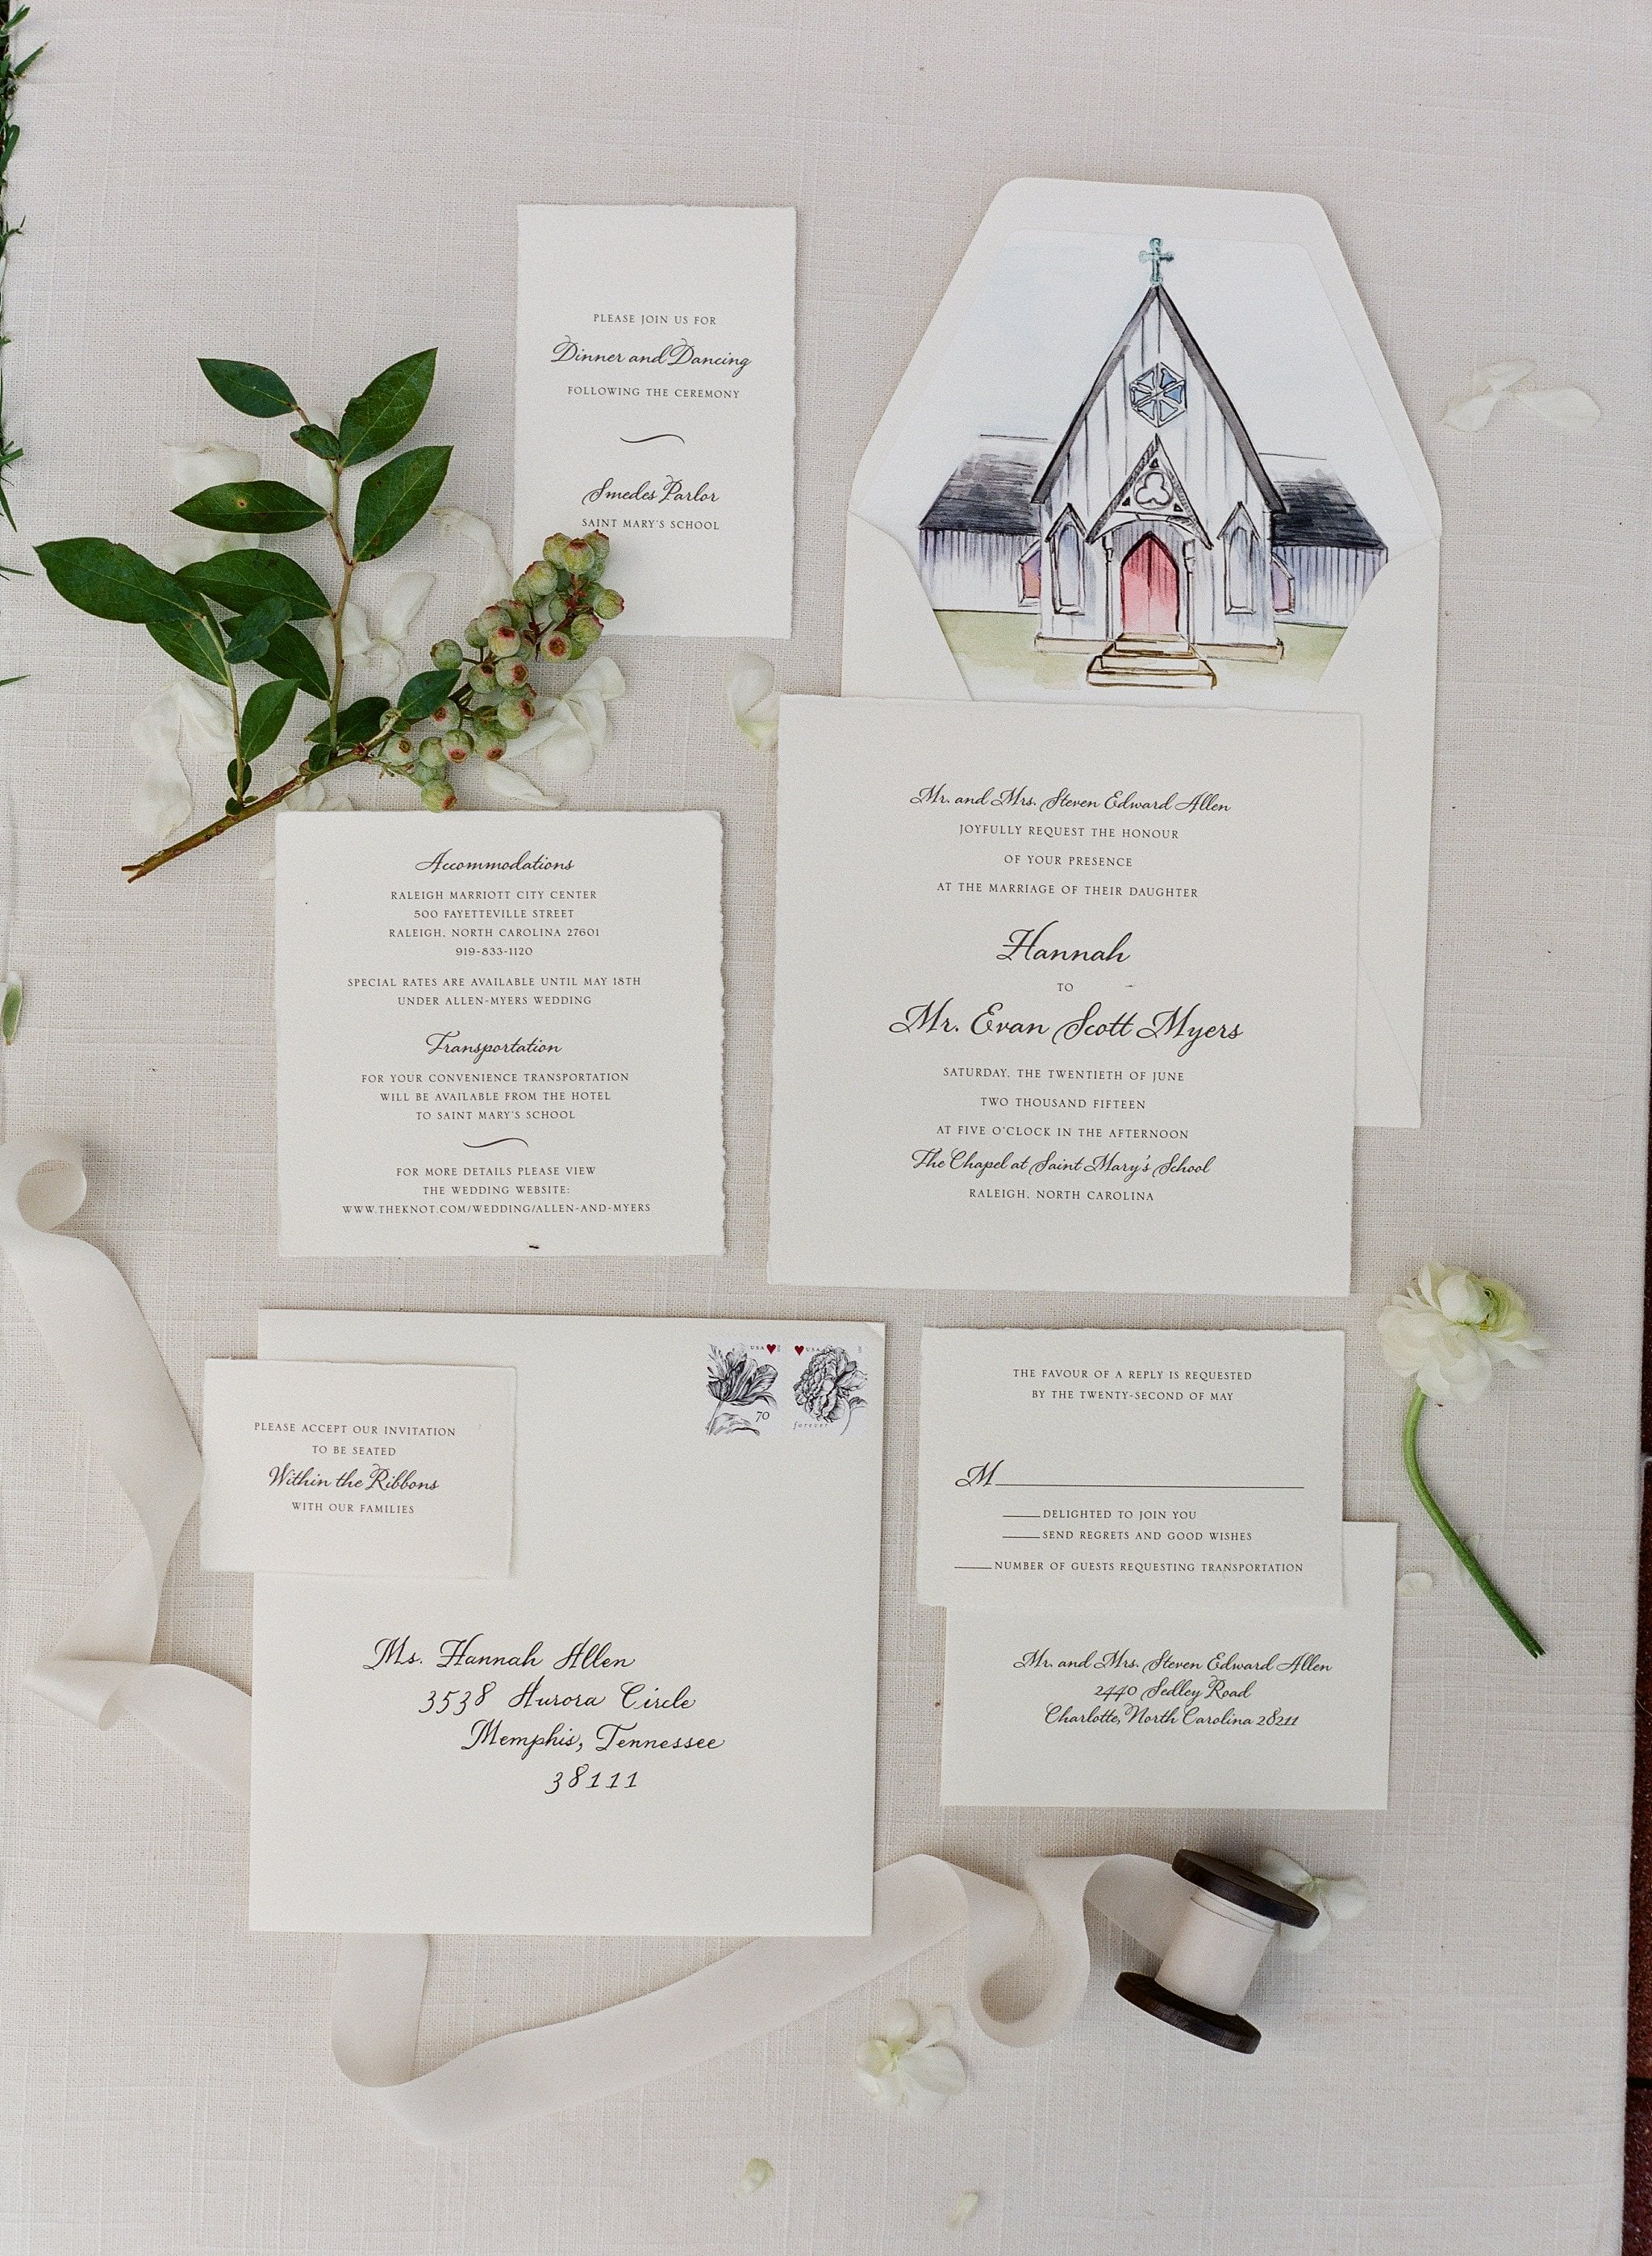 Hannah designed the sketch featured on her wedding invitation suite of Saint Mary's Chapel. 